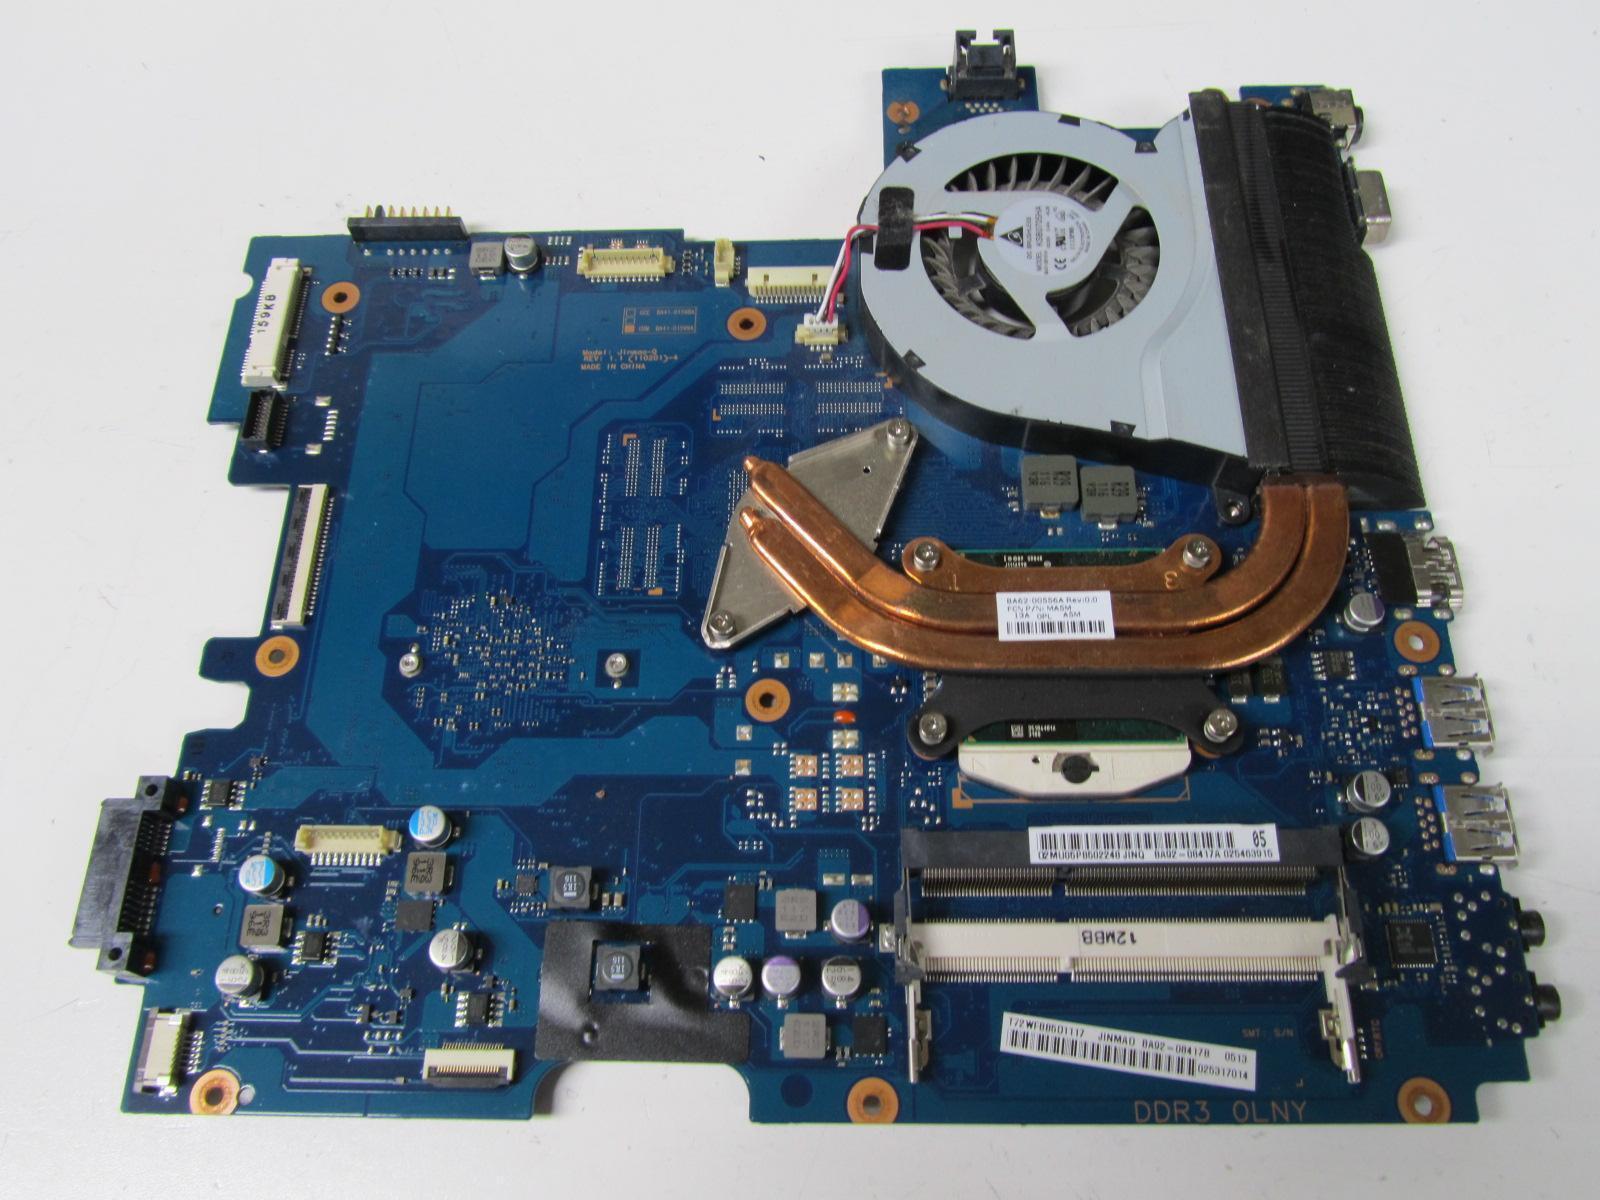 Samsung RC512-L i3-2310M 2.1GHz Intel Motherboard - BA92-08417A - Tested